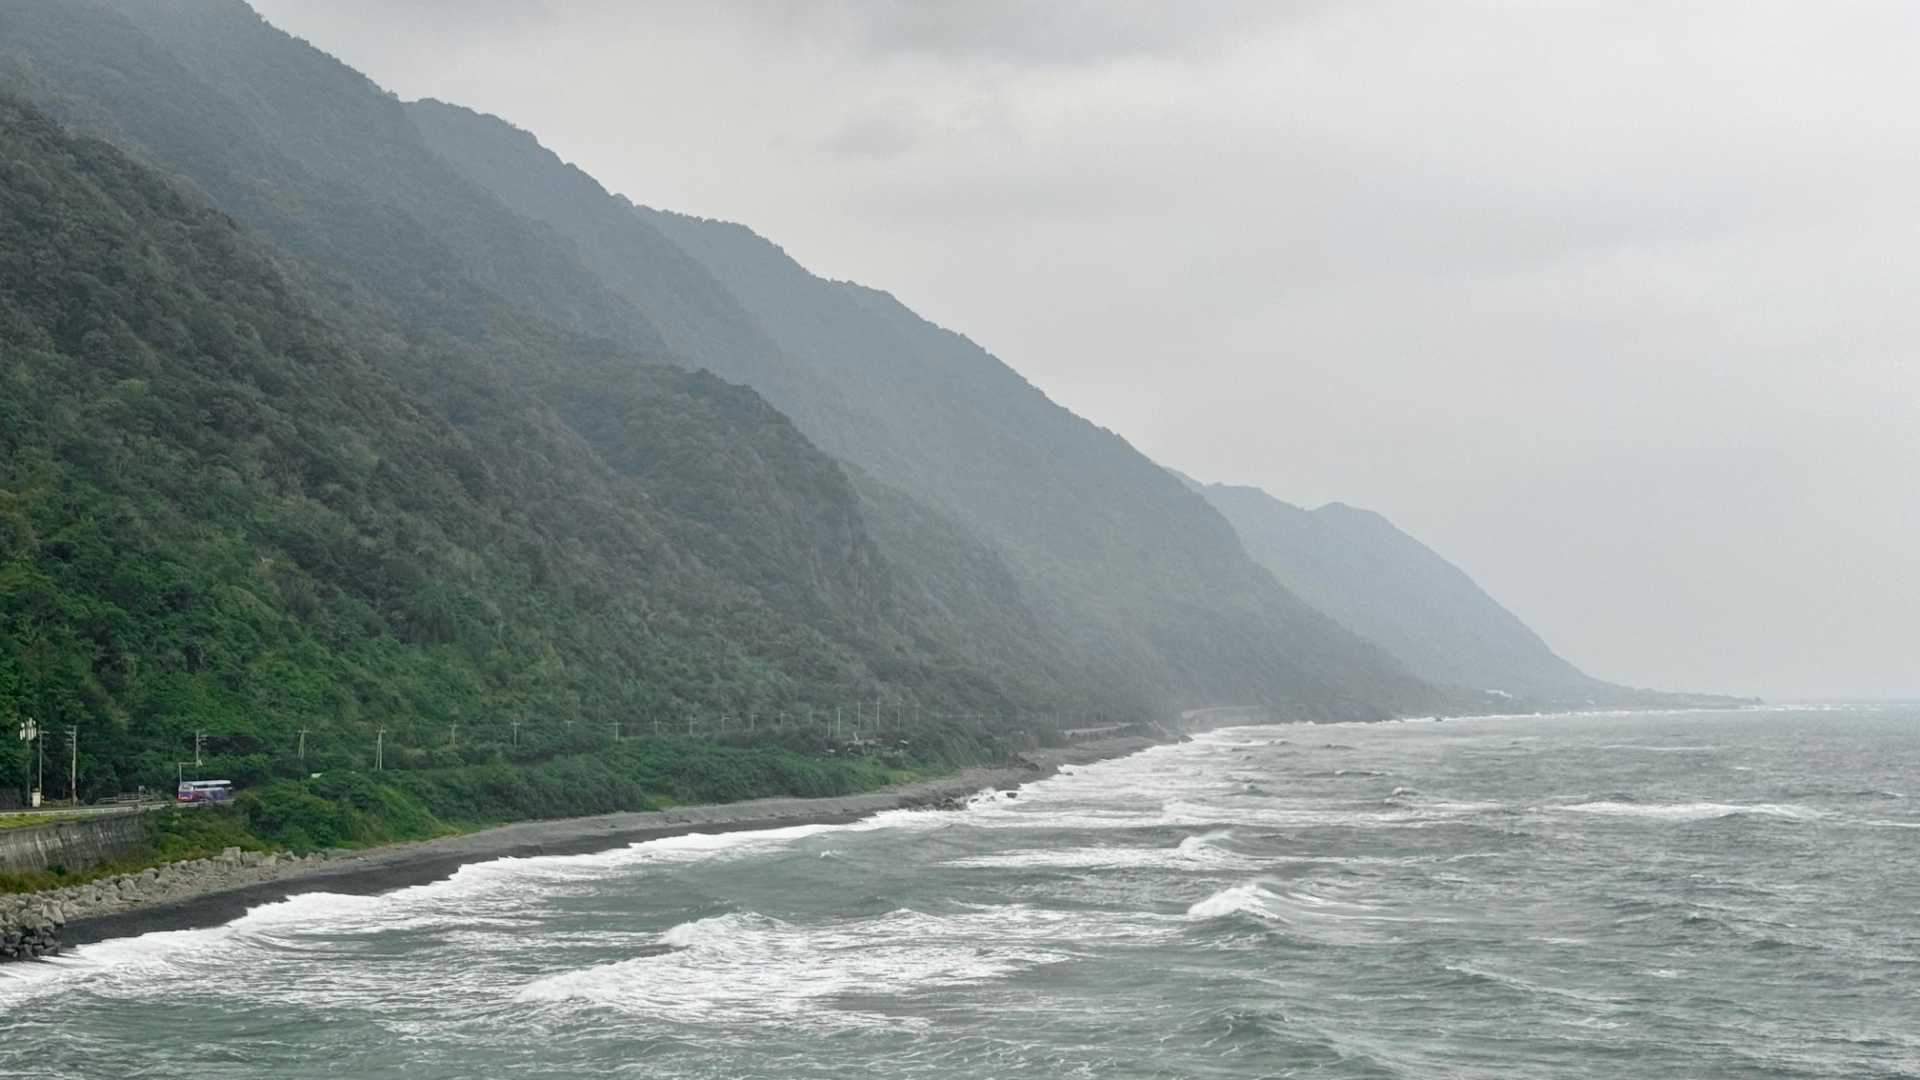 Large waves reaching the shore beneath forest-clad mountains. It is a misty day.